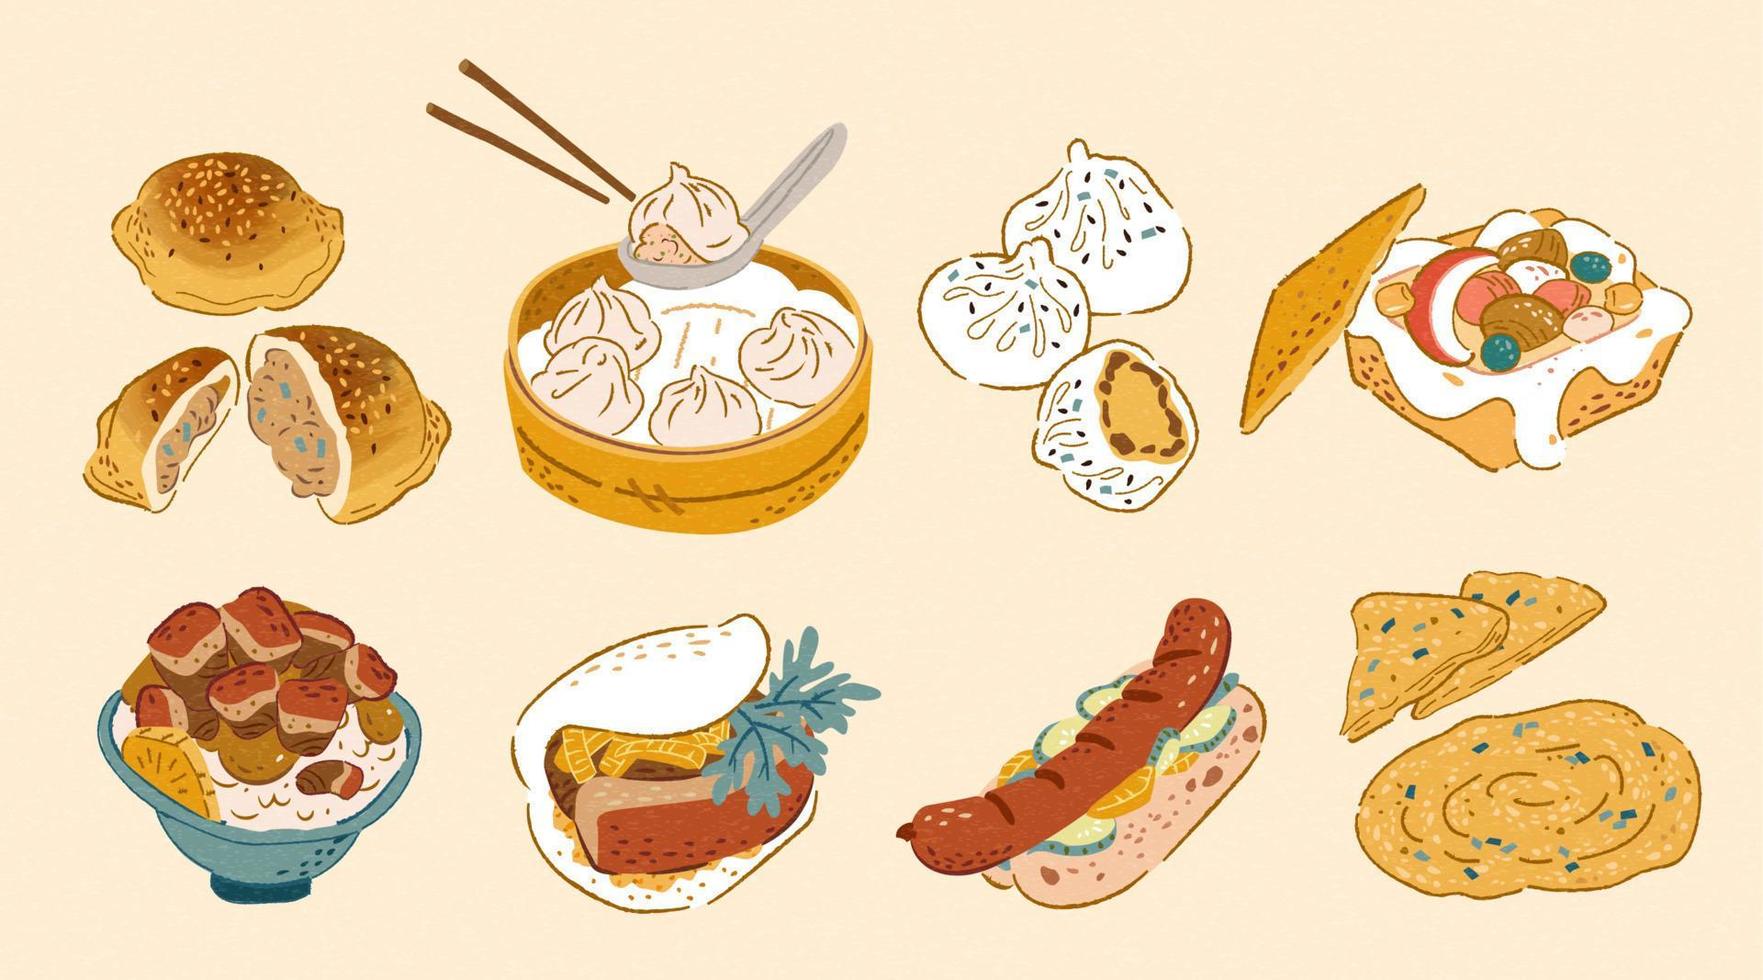 Taiwan street food collection in doodle design, including pepper buns, xiao long bao, pan-fried bun, coffin bread, braised pork rice, gua bao, sausage with sticky rice, and scallion pie. vector